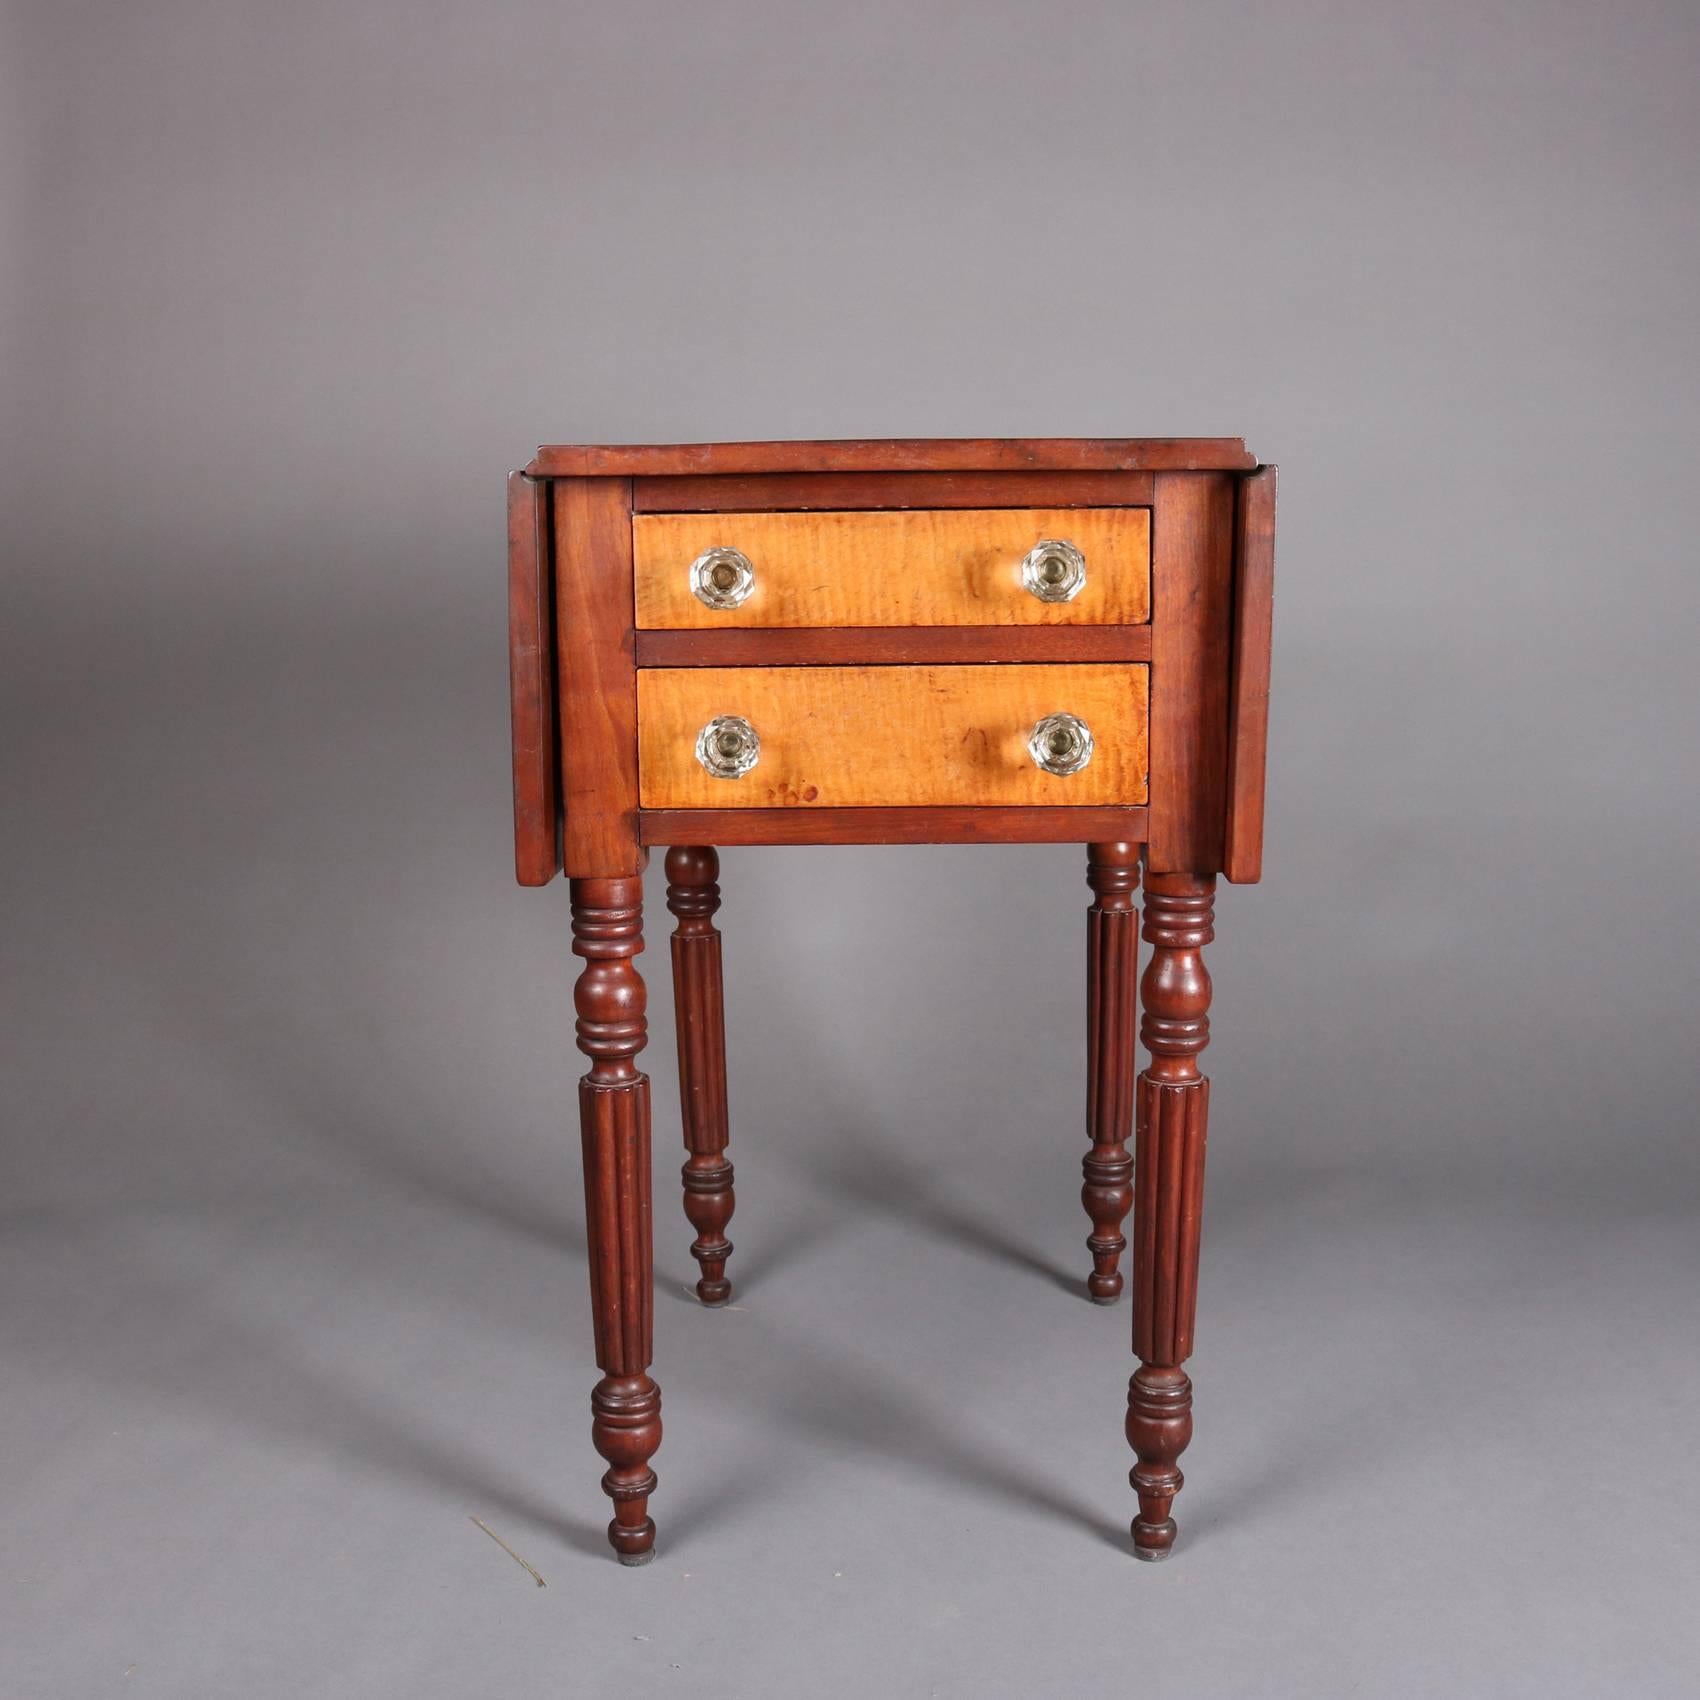 Antique Sheraton drop leaf stand features cherry construction with two tiger maple drawers with molded glass knobs and is seated on turned and reeded legs, 19th century.

Measures: 29